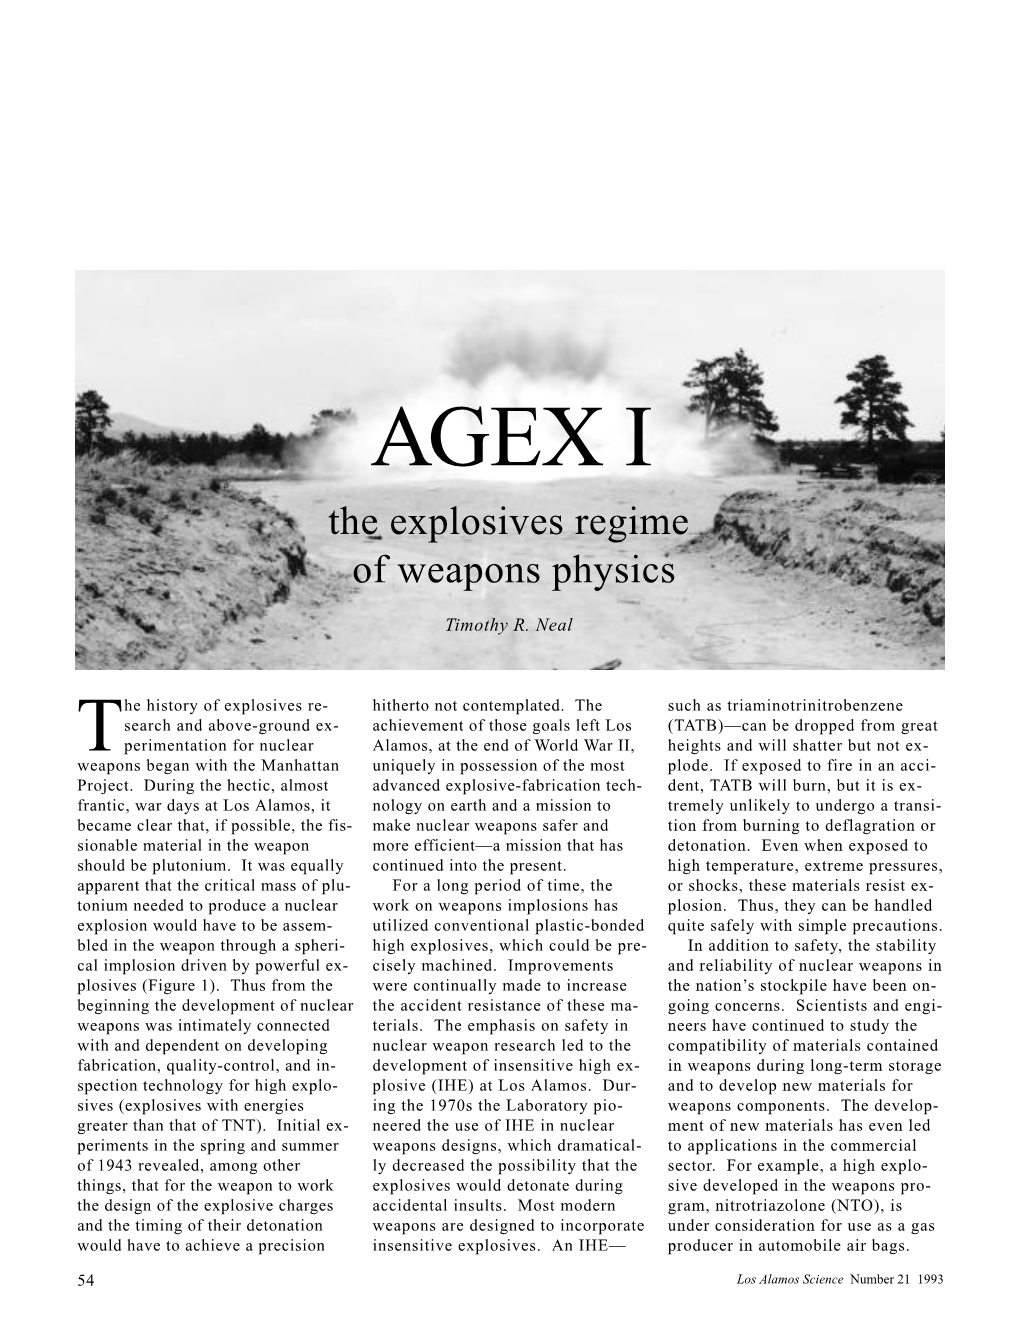 AGEX I: the Explosives Regime of Weapons Physics